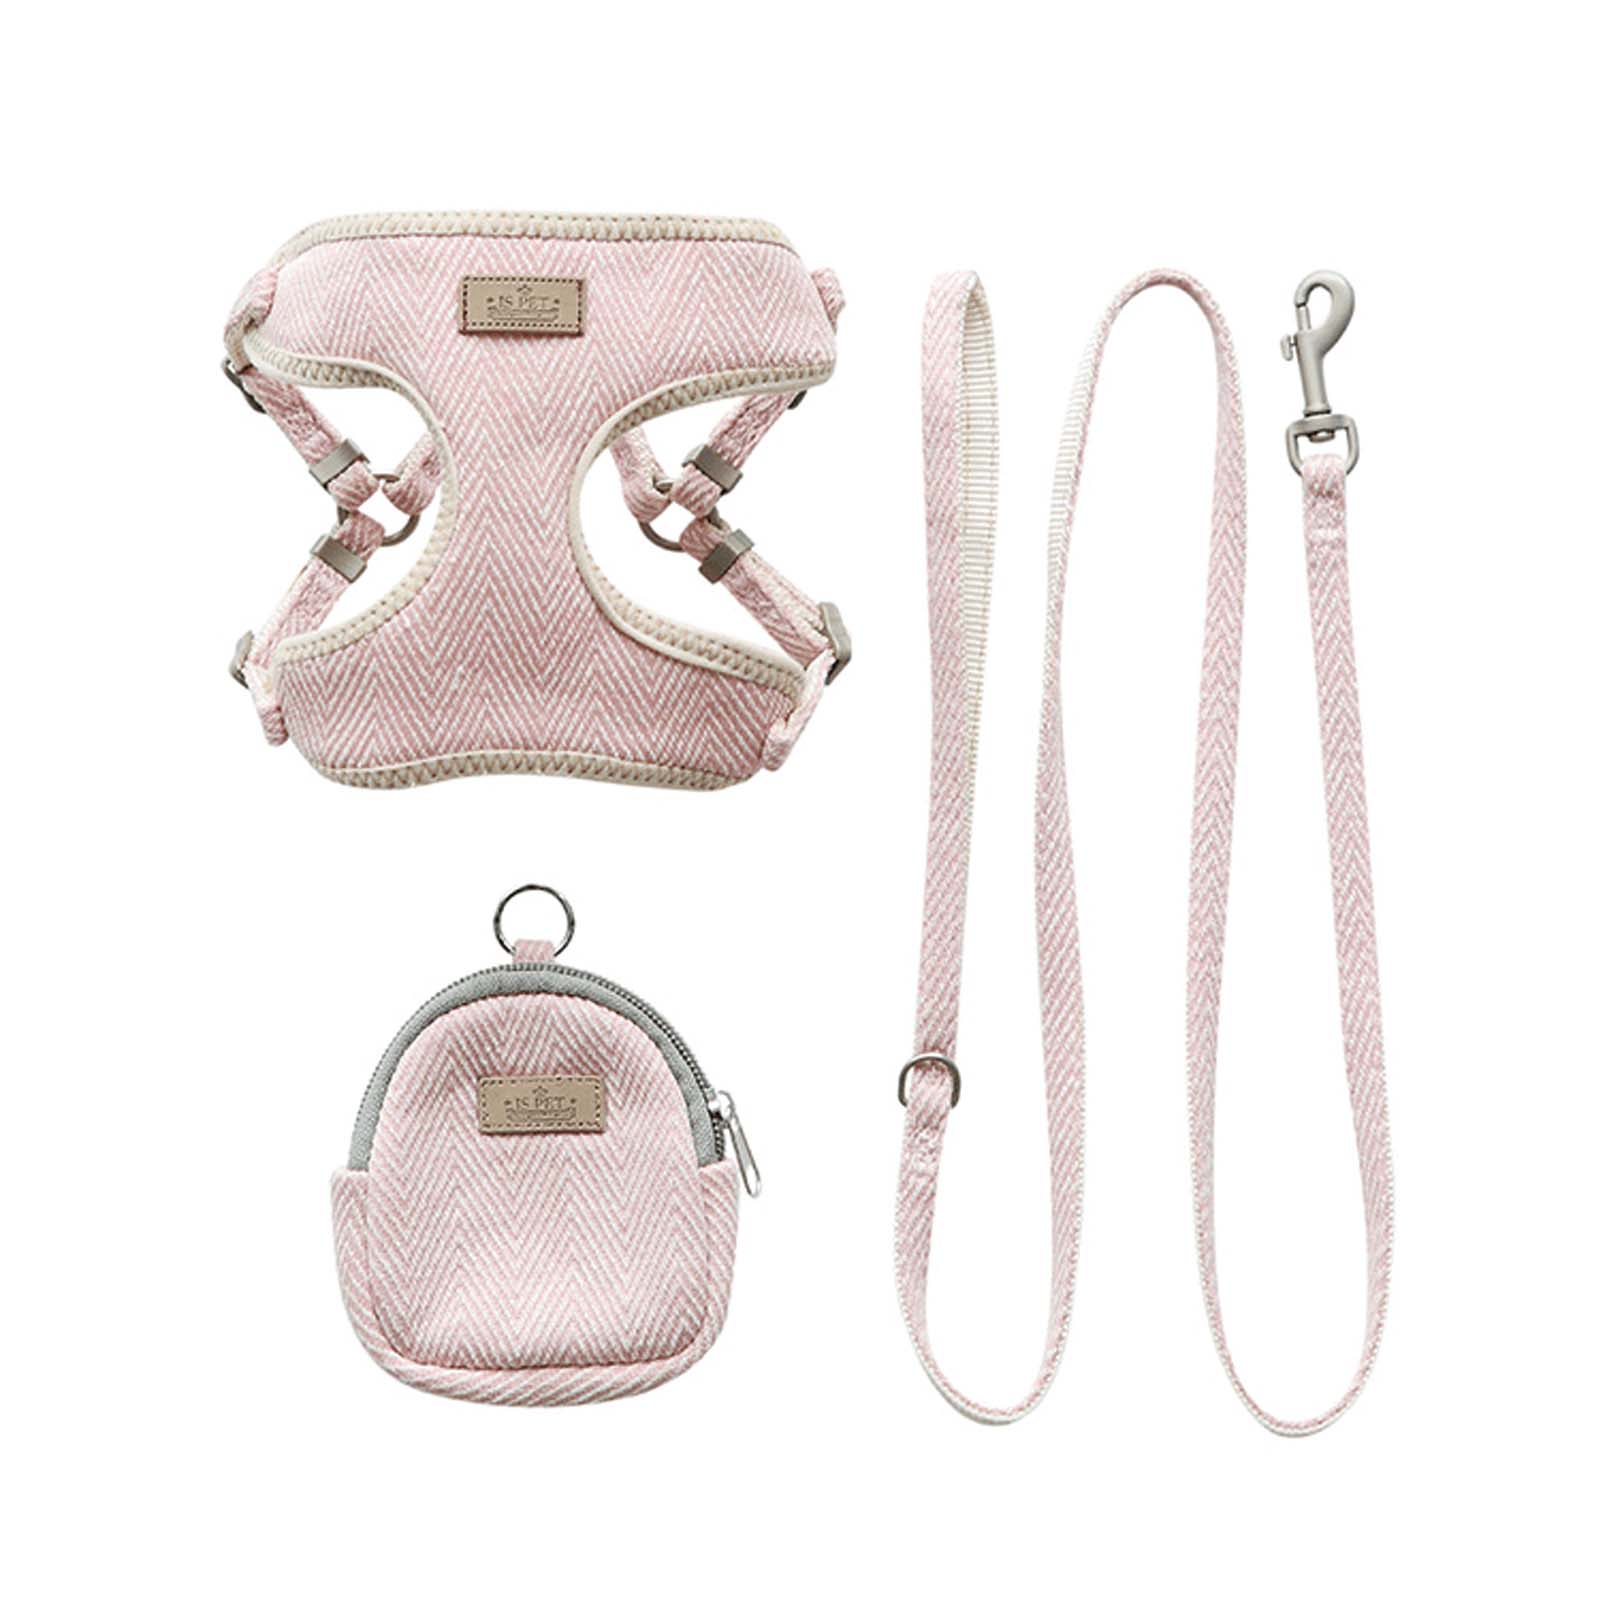 Comfort Soft Curve Shape Dog Harness & Leash (Two-in-one Set)